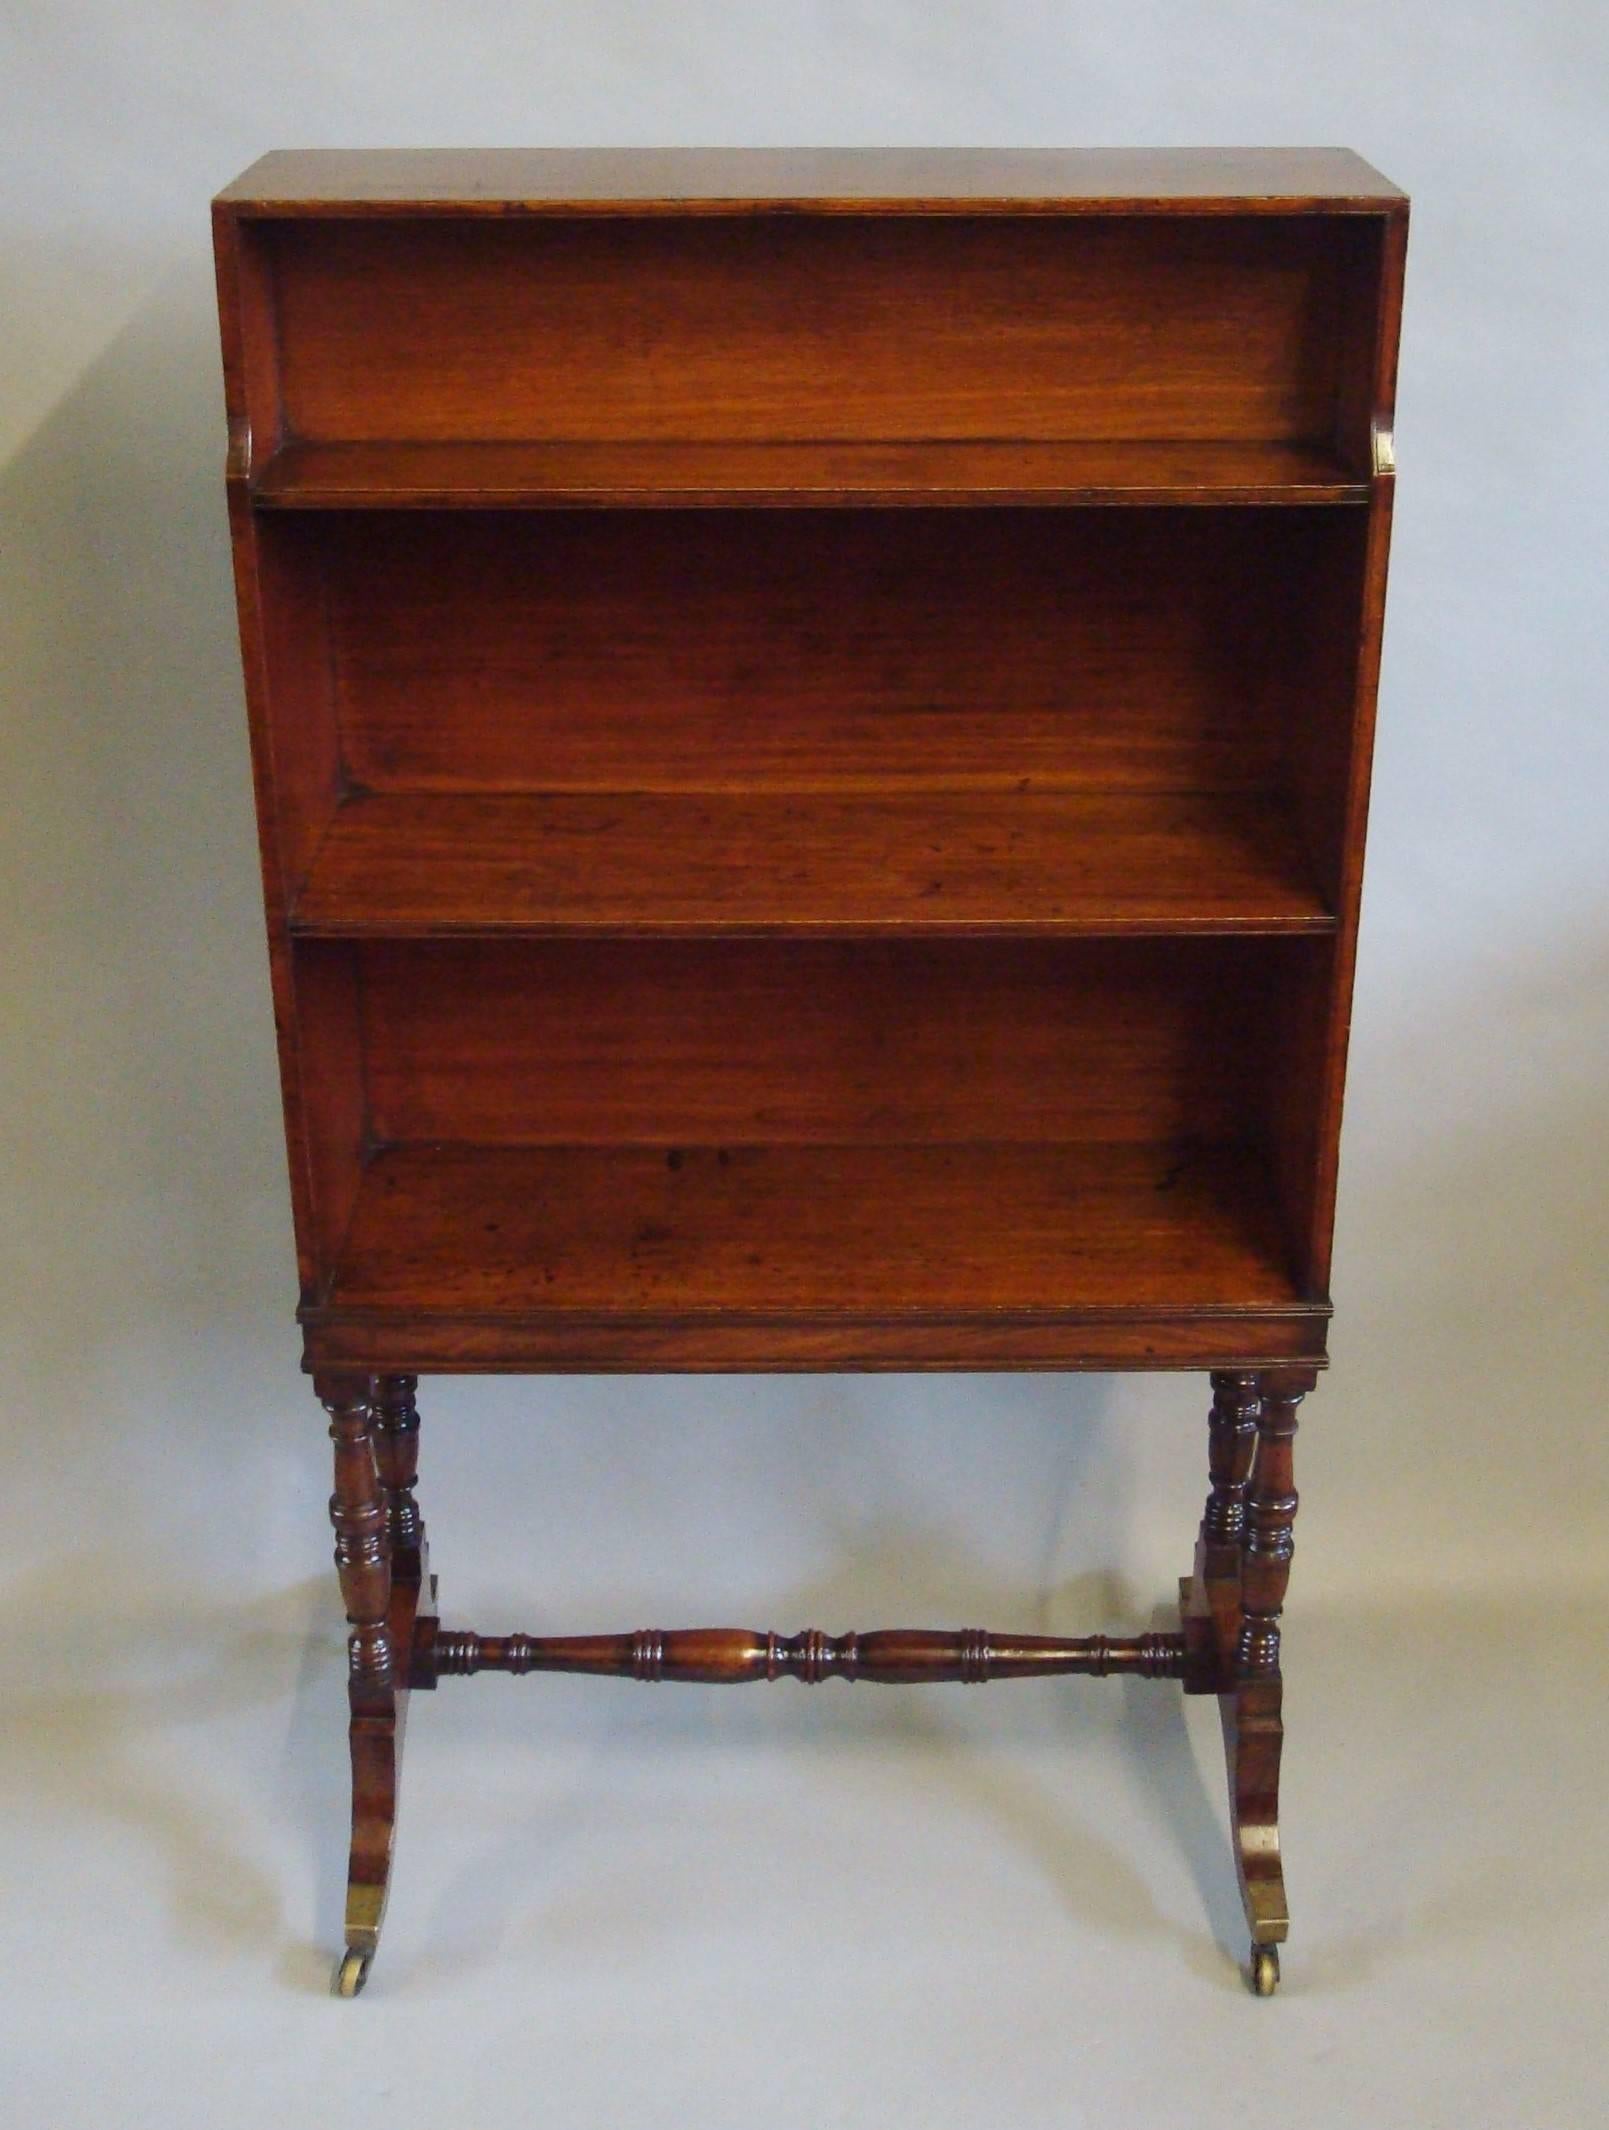 Regency Mahogany Waterfall Open Bookcase of Freestanding Form In Excellent Condition For Sale In Moreton-in-Marsh, Gloucestershire